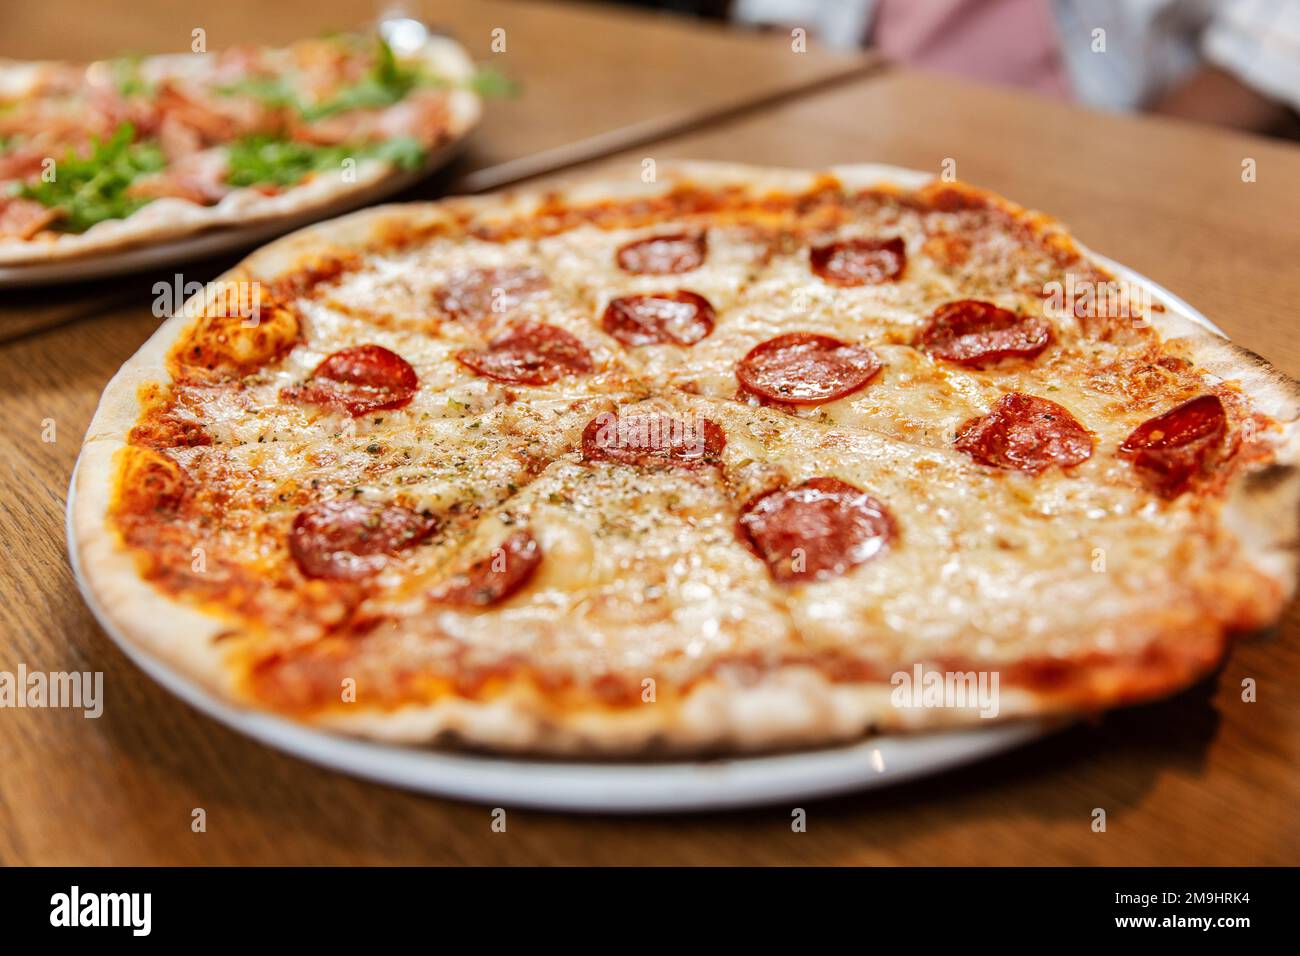 close up of pizza on wooden table Stock Photo